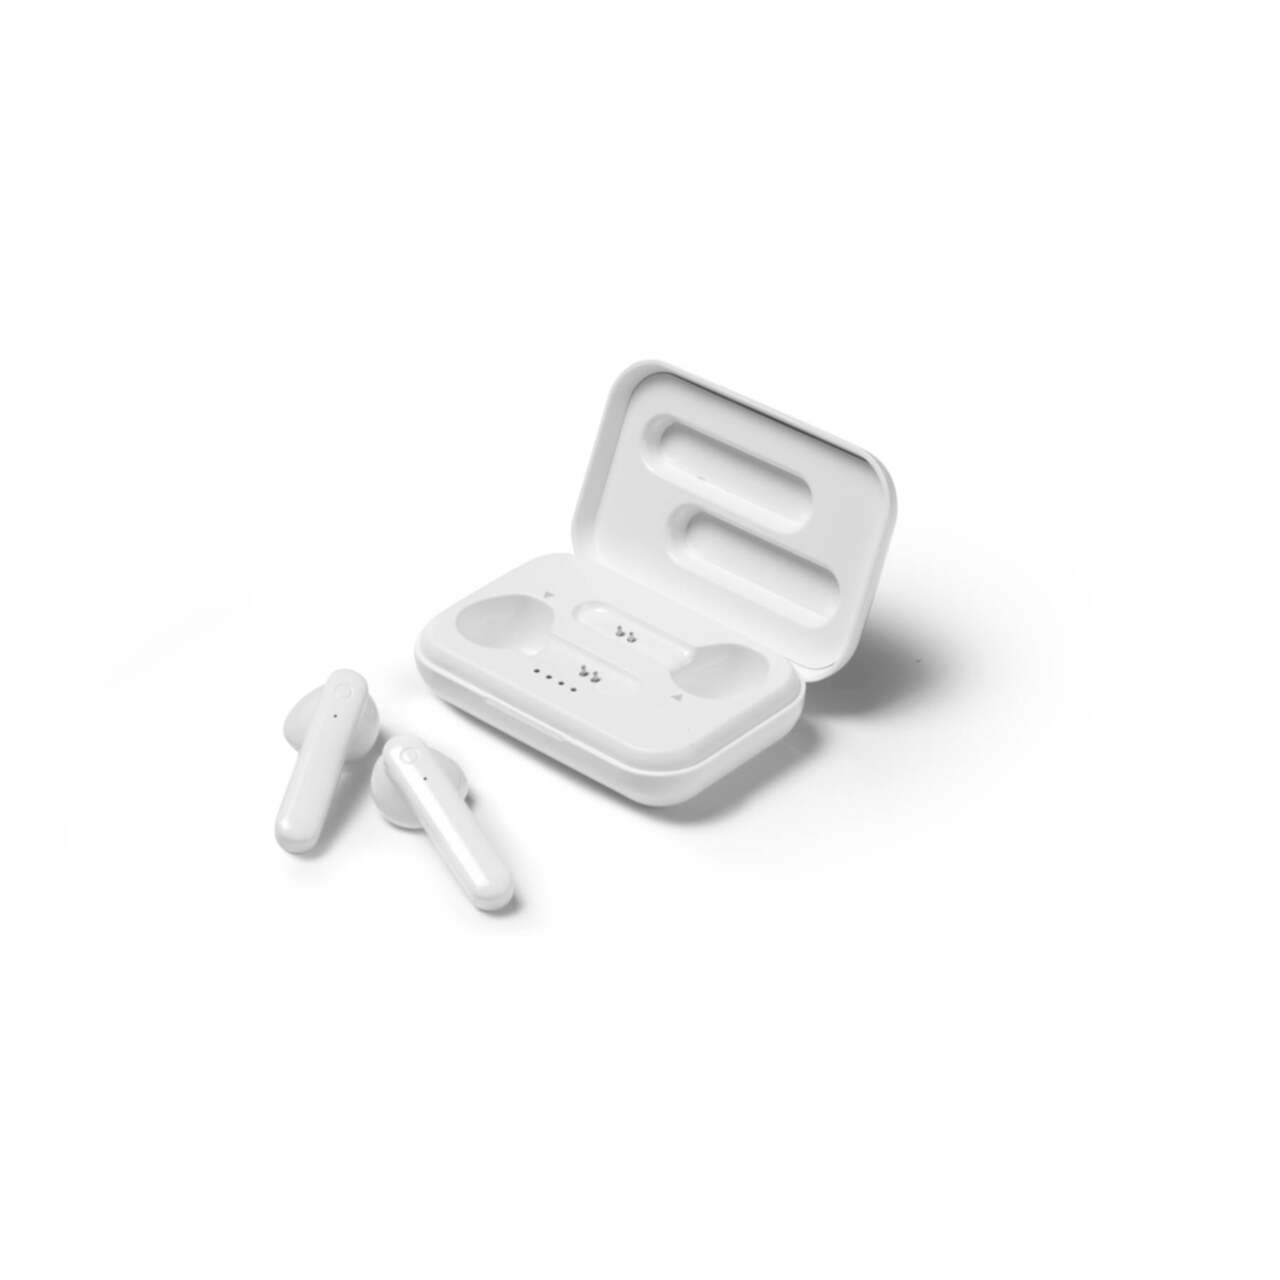 Bluehive Bluepods Elite Active Noise Cancelling Earbuds with Hands